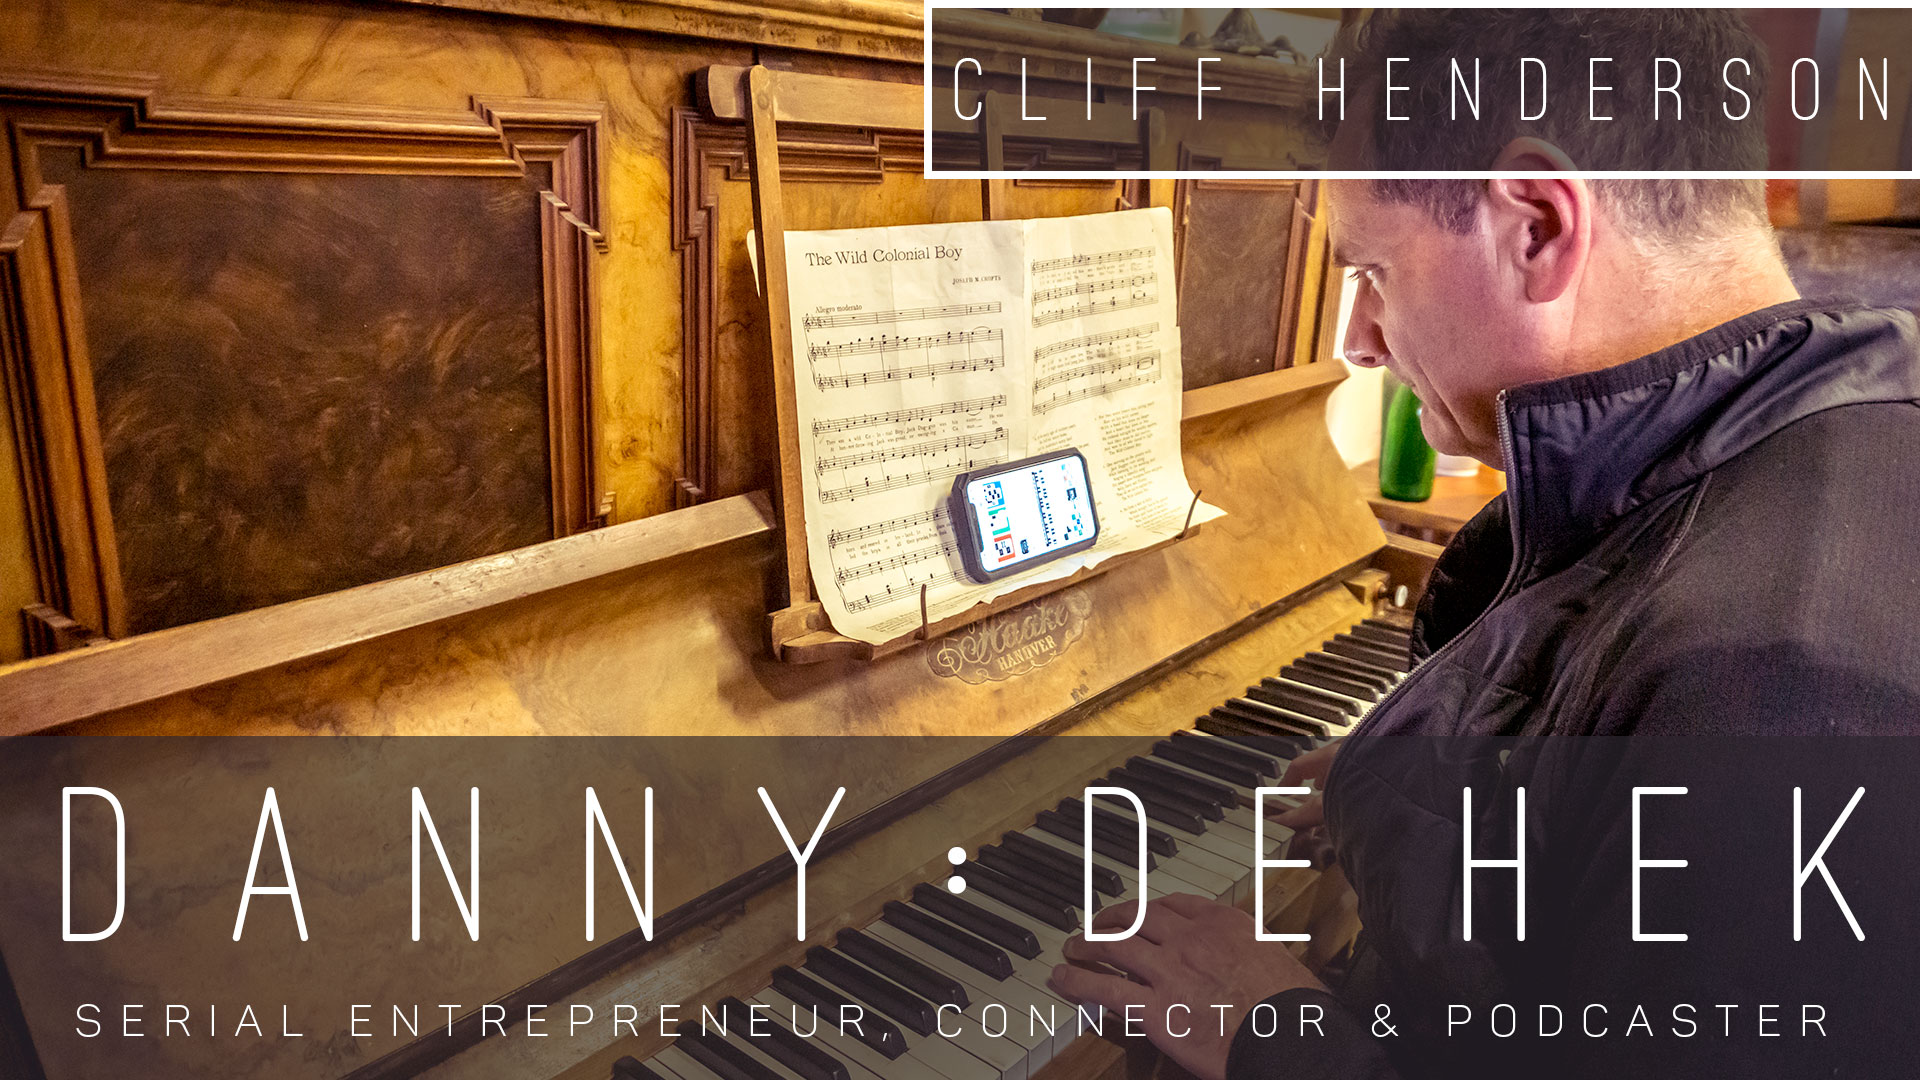 WHAT DE HEK Podcast 12 Questions with ExJehovahs Witness Cliff Fifth Henderson Rappernbsp› Entrepreneur Decision Maker Connector Podcaster Educator